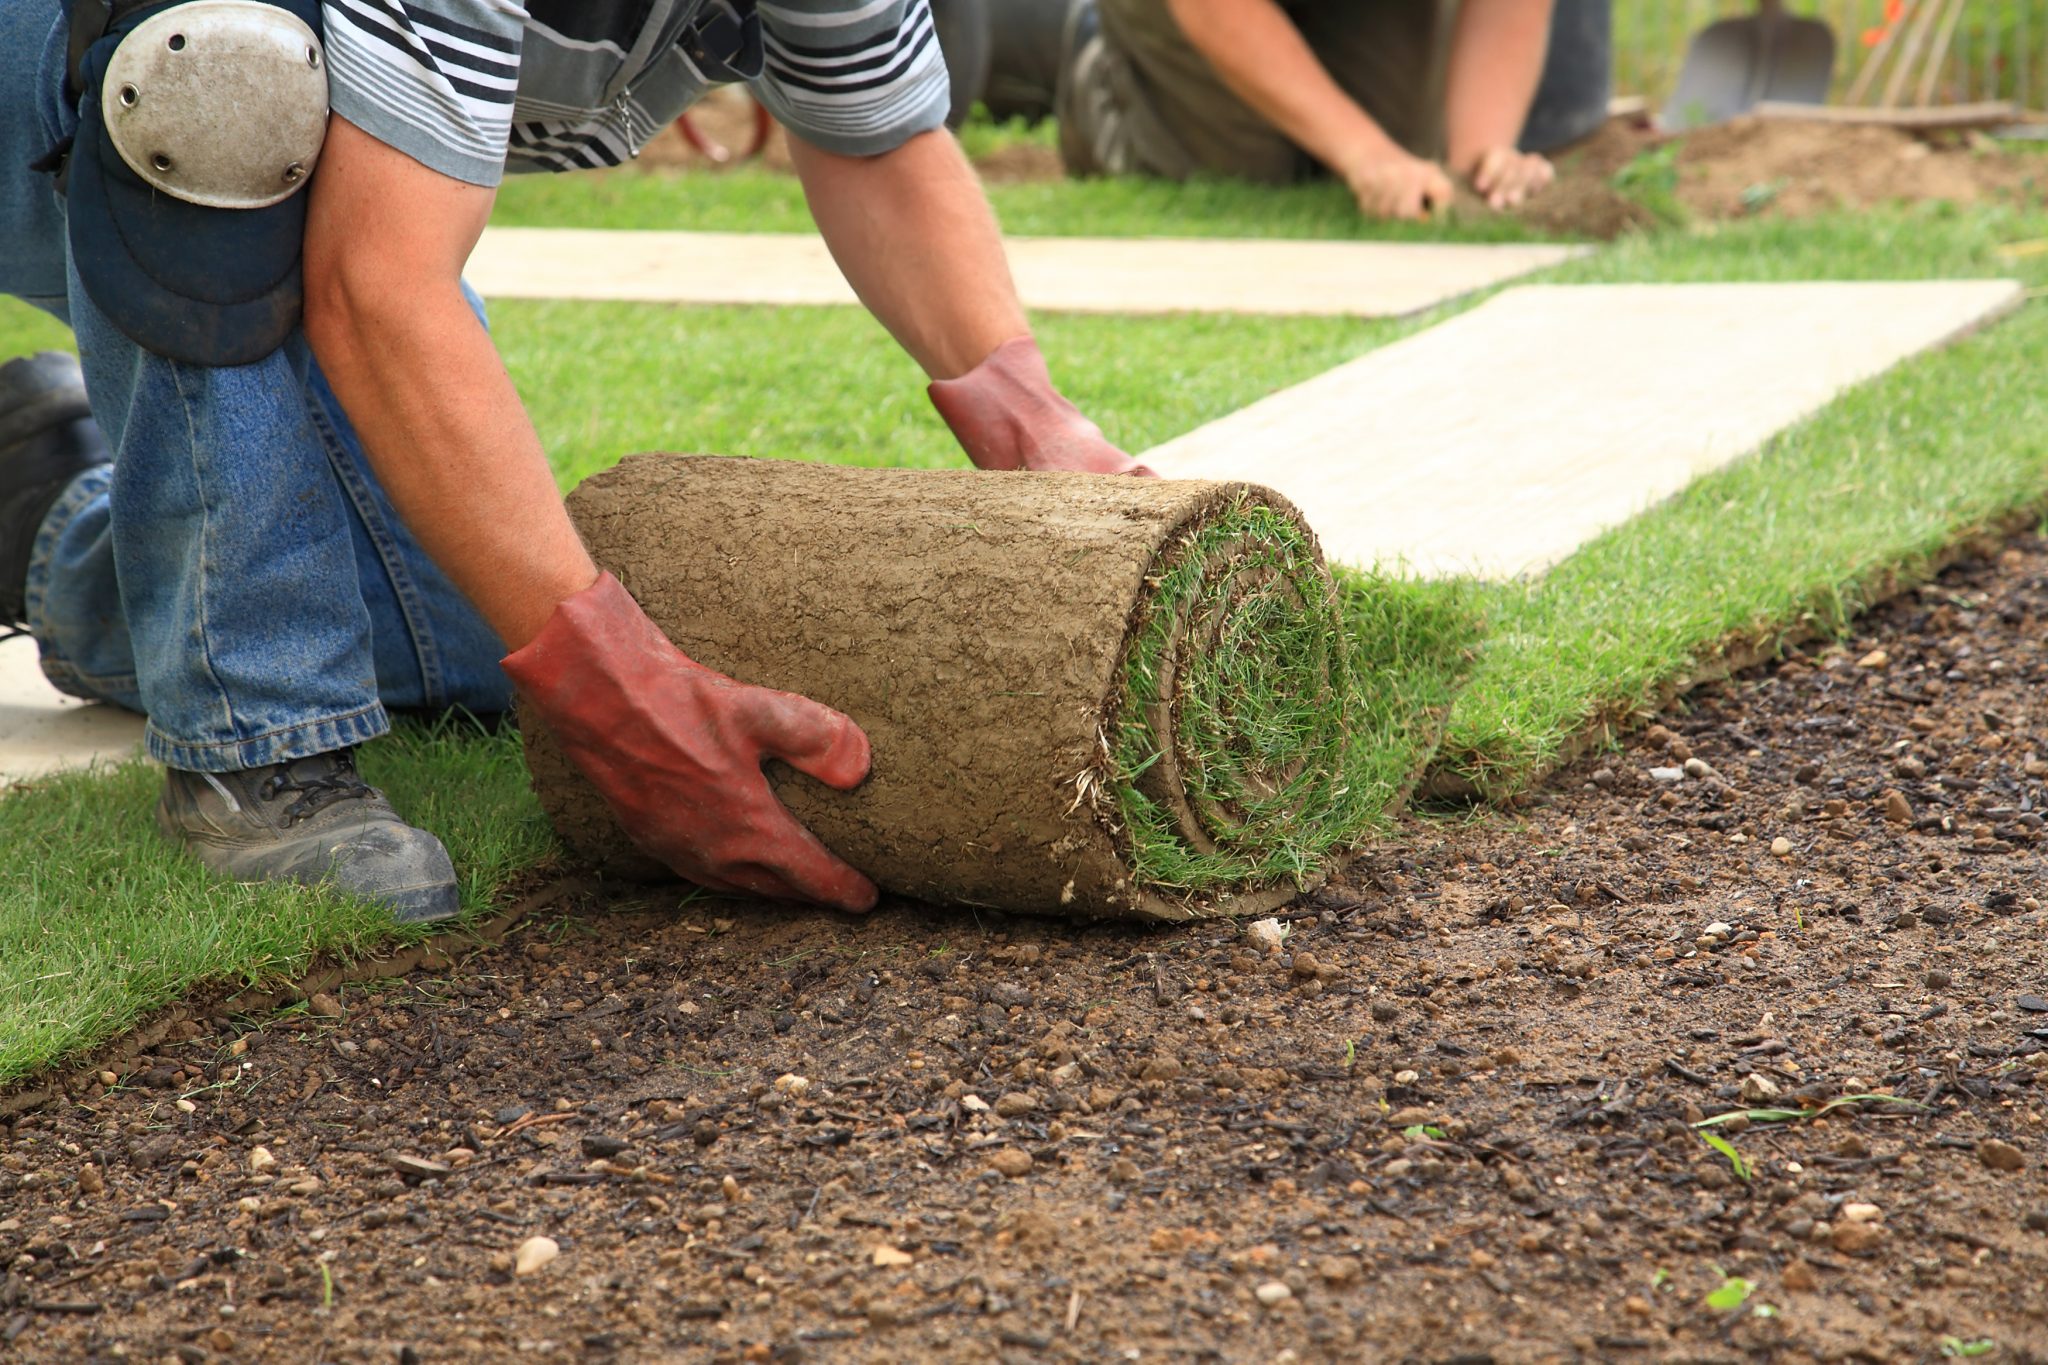 How To Start A Landscaping Business, How To Start A Landscaping Business In Texas